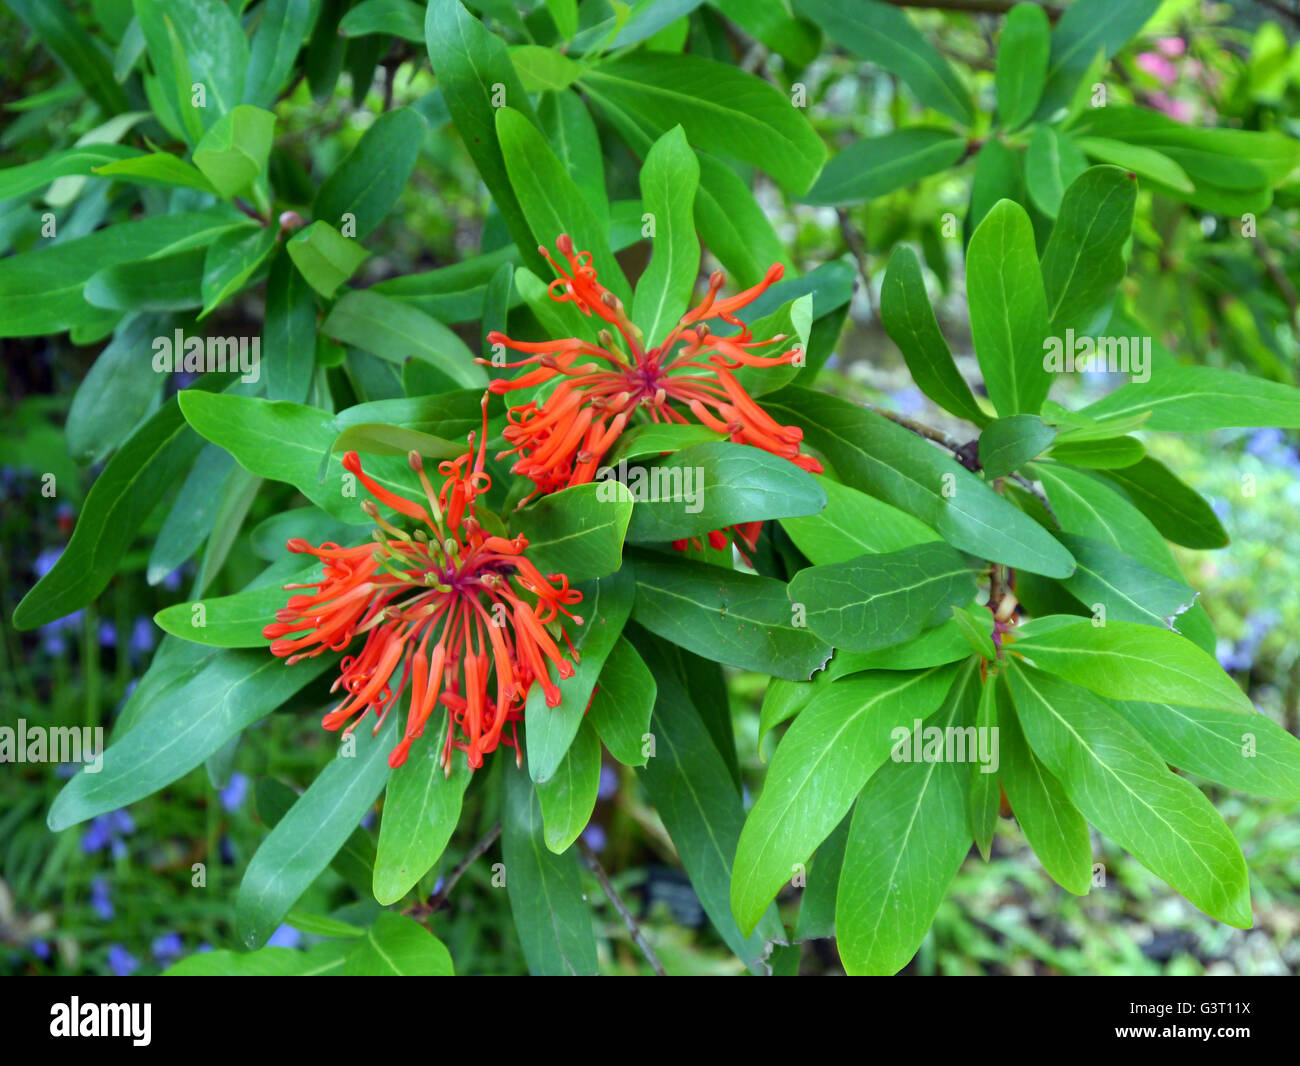 Chilean Fire Tree Embothrium coccineum 'Inca Flame' at the Himalayan Garden & Sculpture Park, North Yorkshire, England UK. Stock Photo